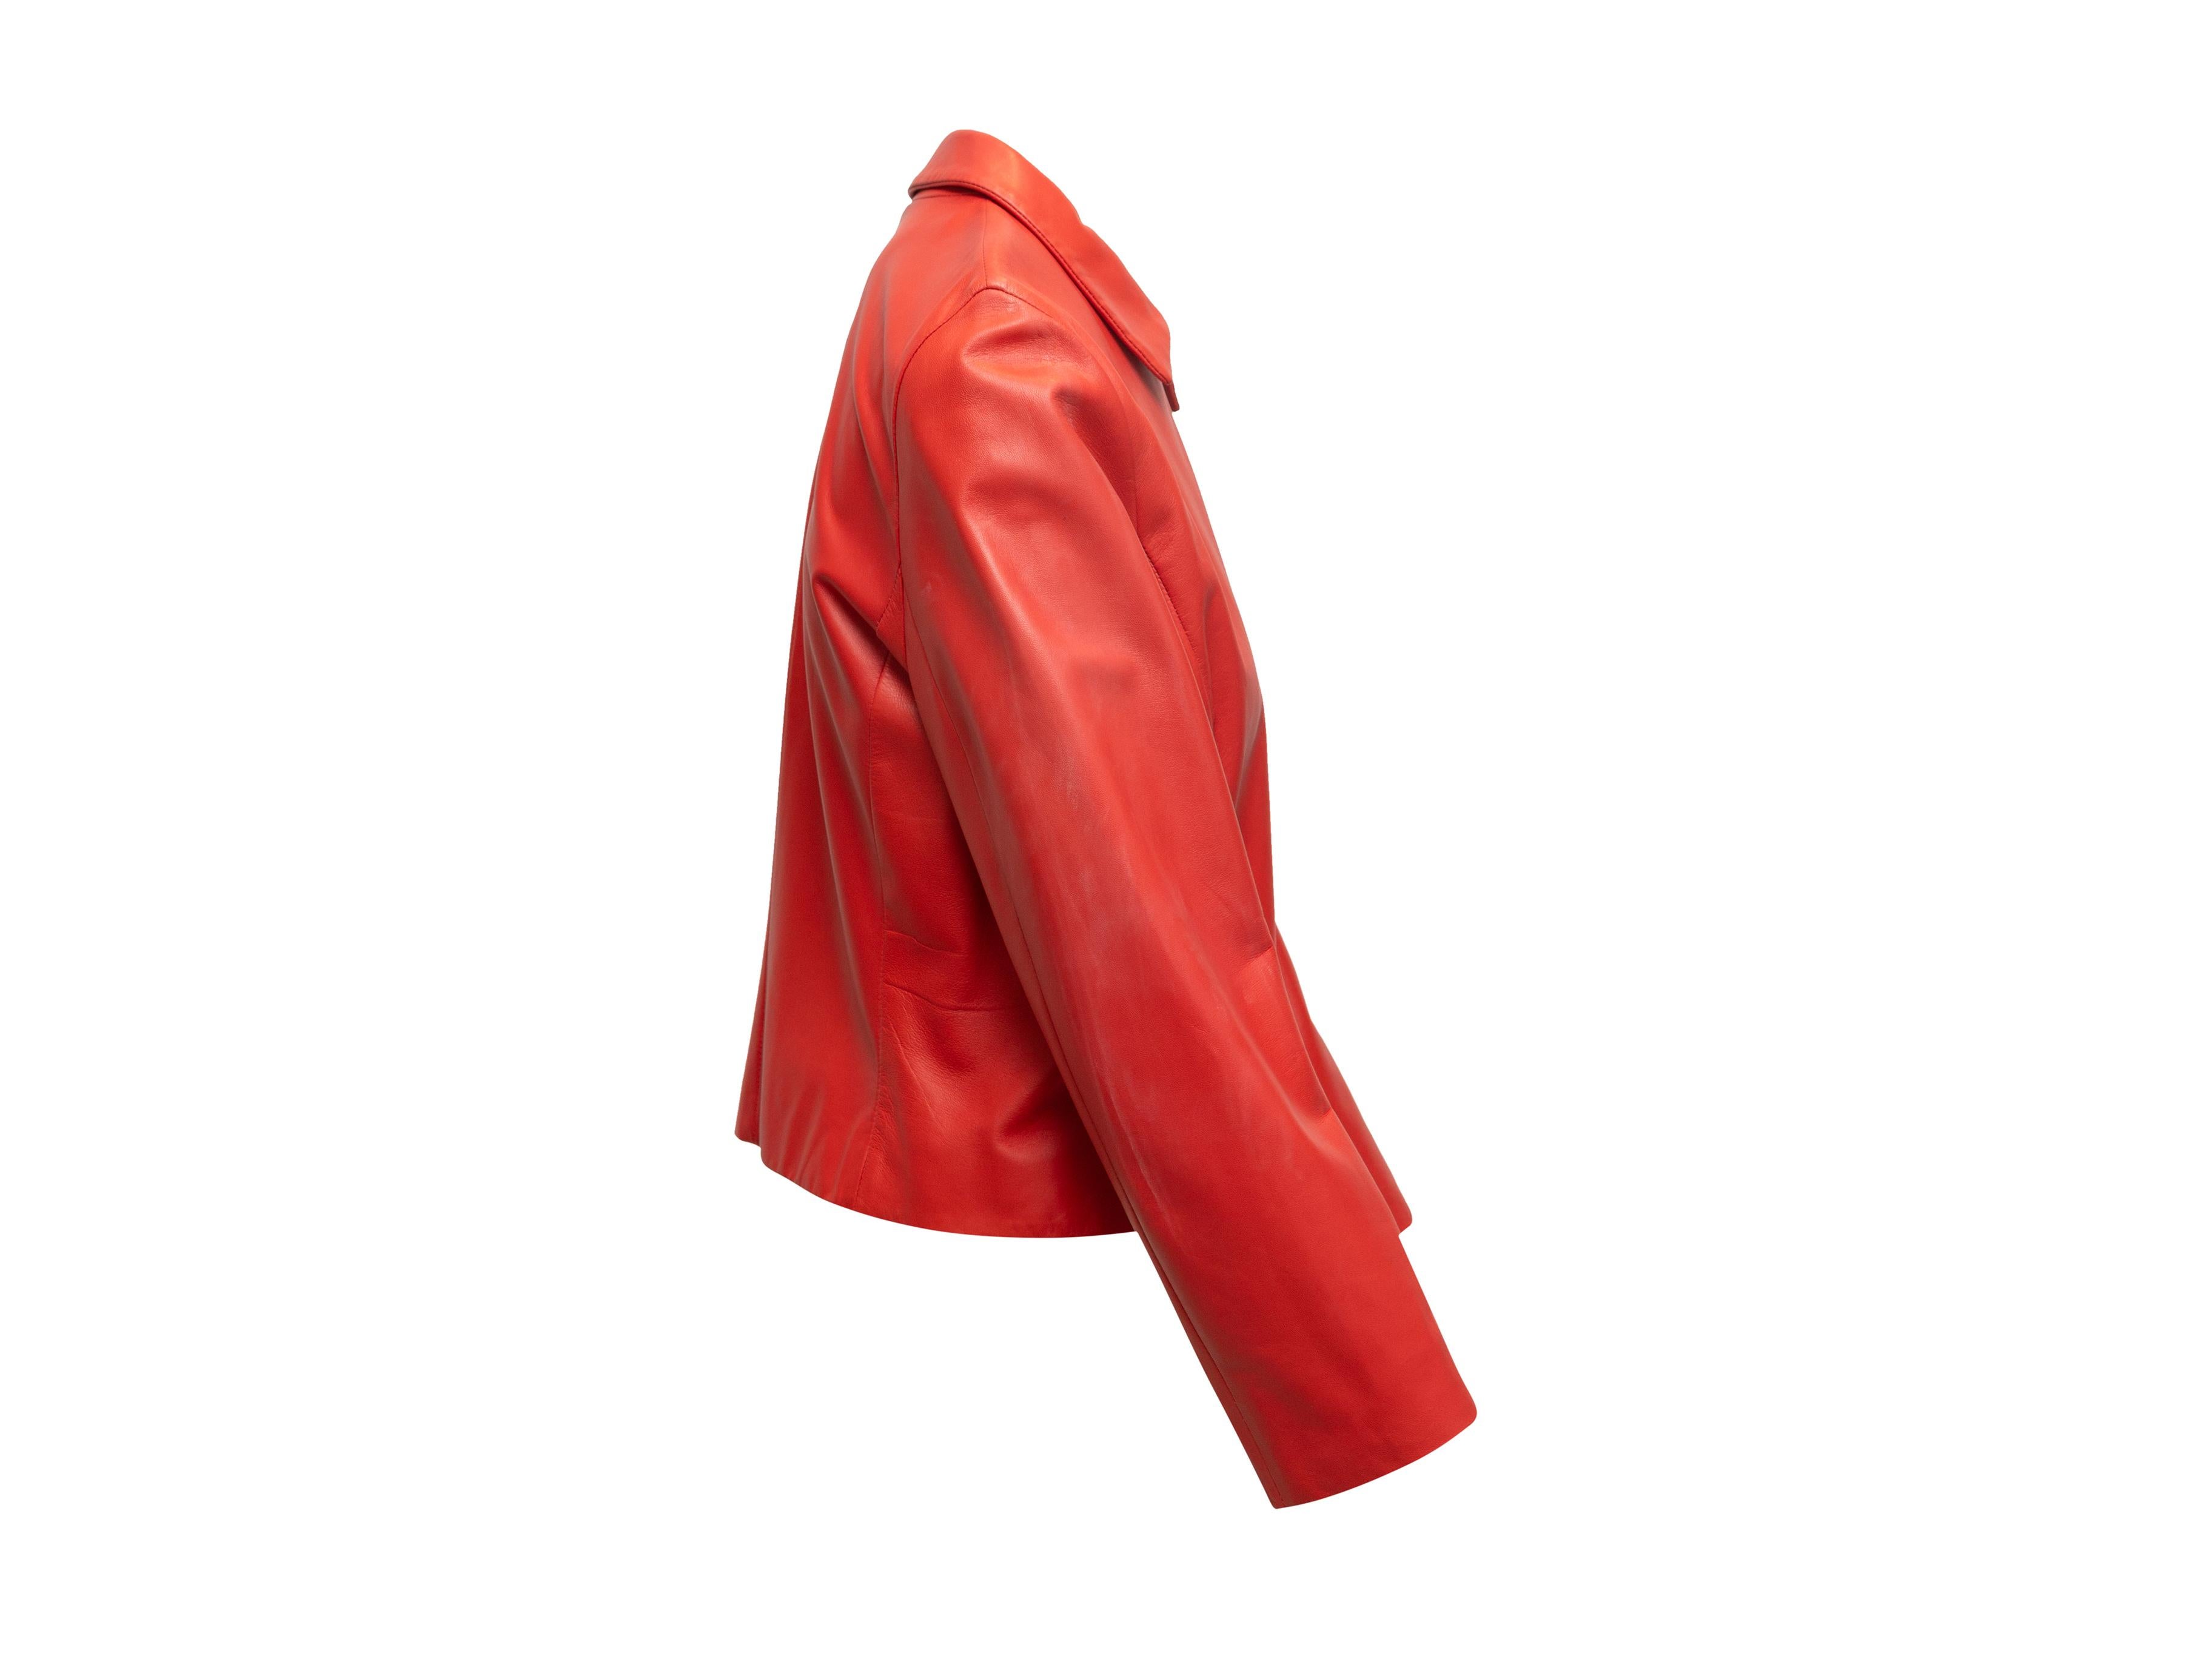 Product details: Red leather jacket by Agnona. Pointed collar. Silk lining. Zip closure at front. Designer size 44. 34